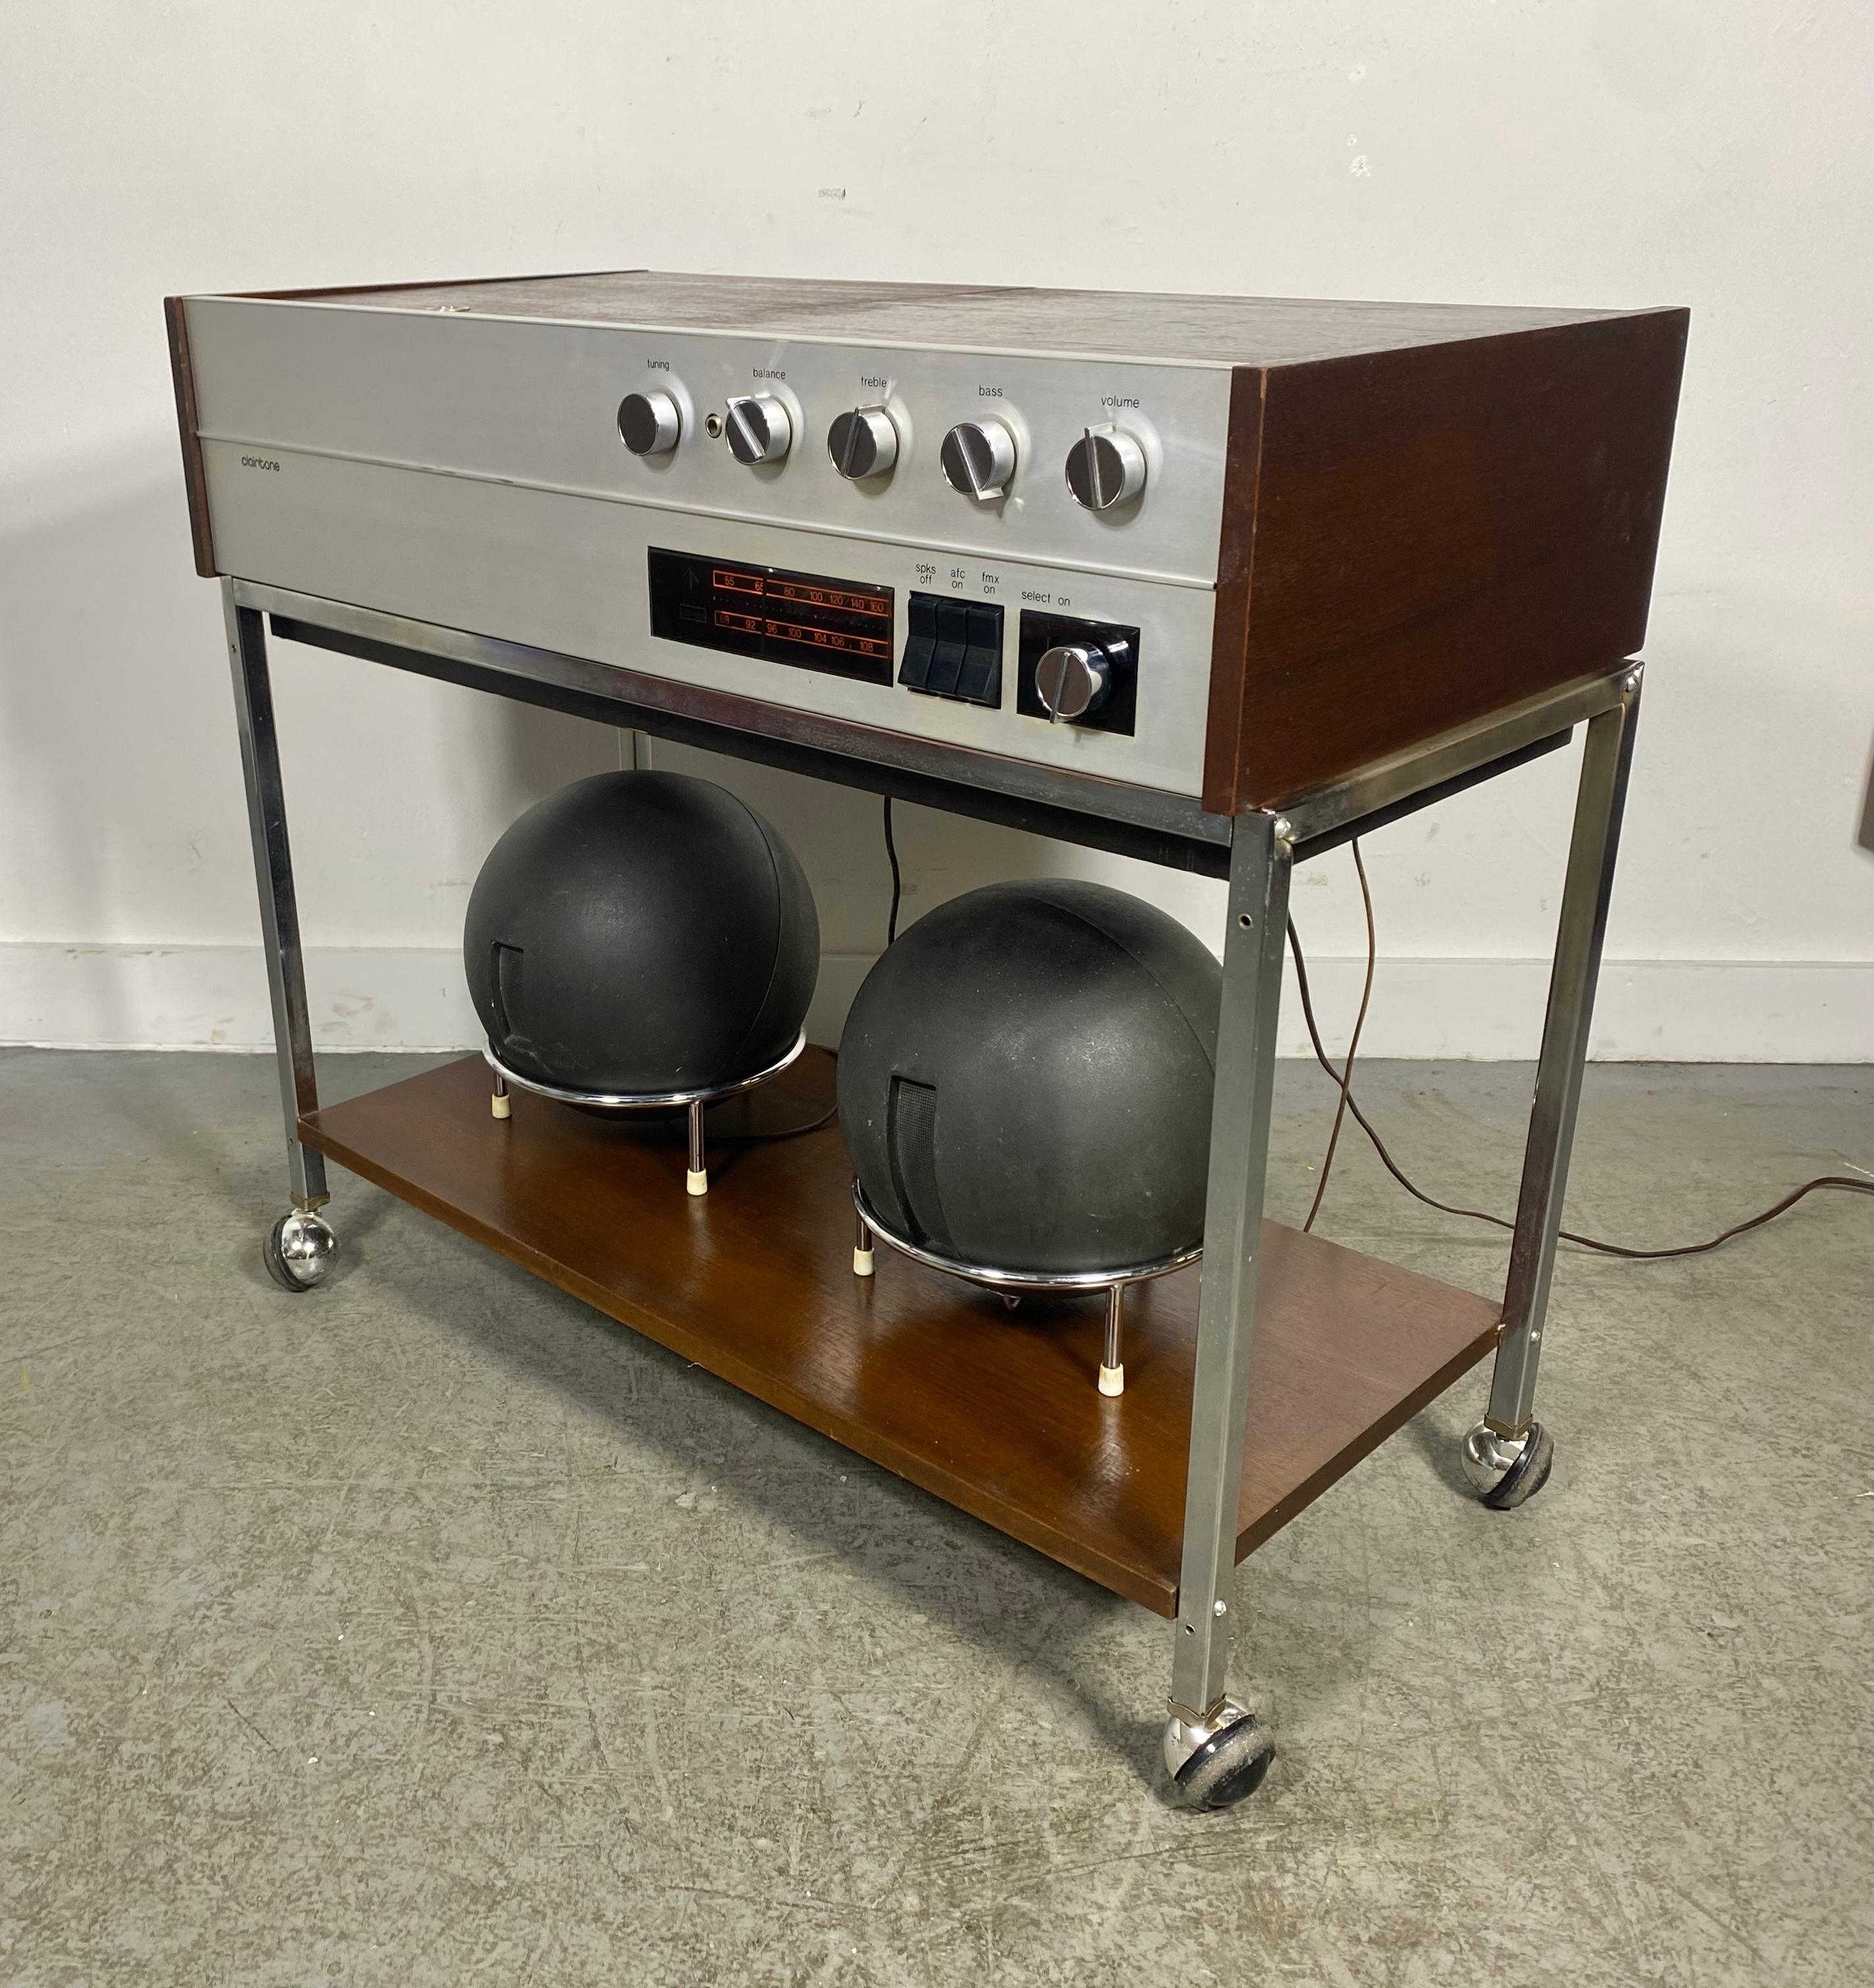 Vintage classic Modernist / Spaceage of high design Clairtone G3 T13 with Garrard turntable all made in Canada.Amazing design..

All functions working perfectly..Sounds great!!

Phono, FM, AM, headphone jack, and speakers are all functioning and